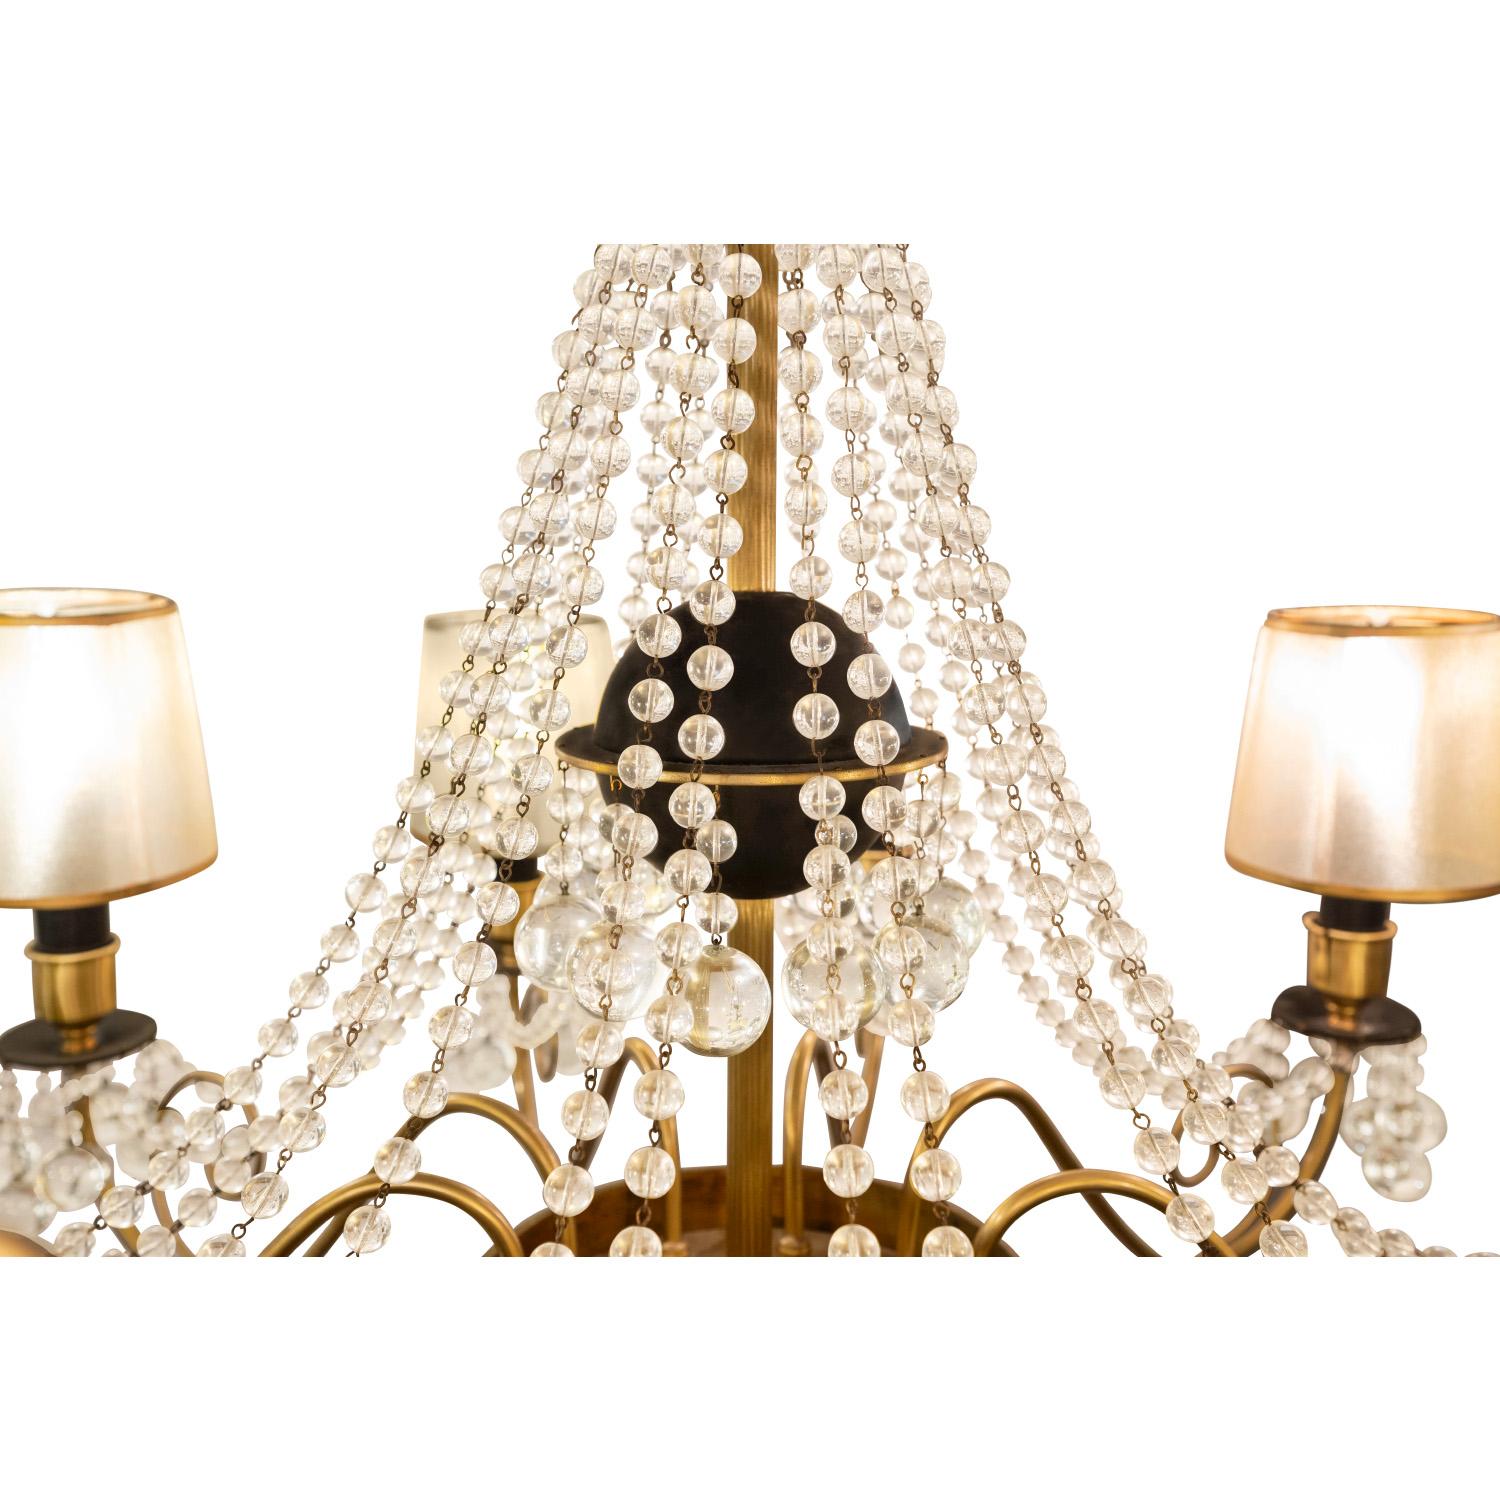 Mid-20th Century Tommi Parzinger Attributed Elegant 10 Arm Chandelier with Crystals 1950s For Sale